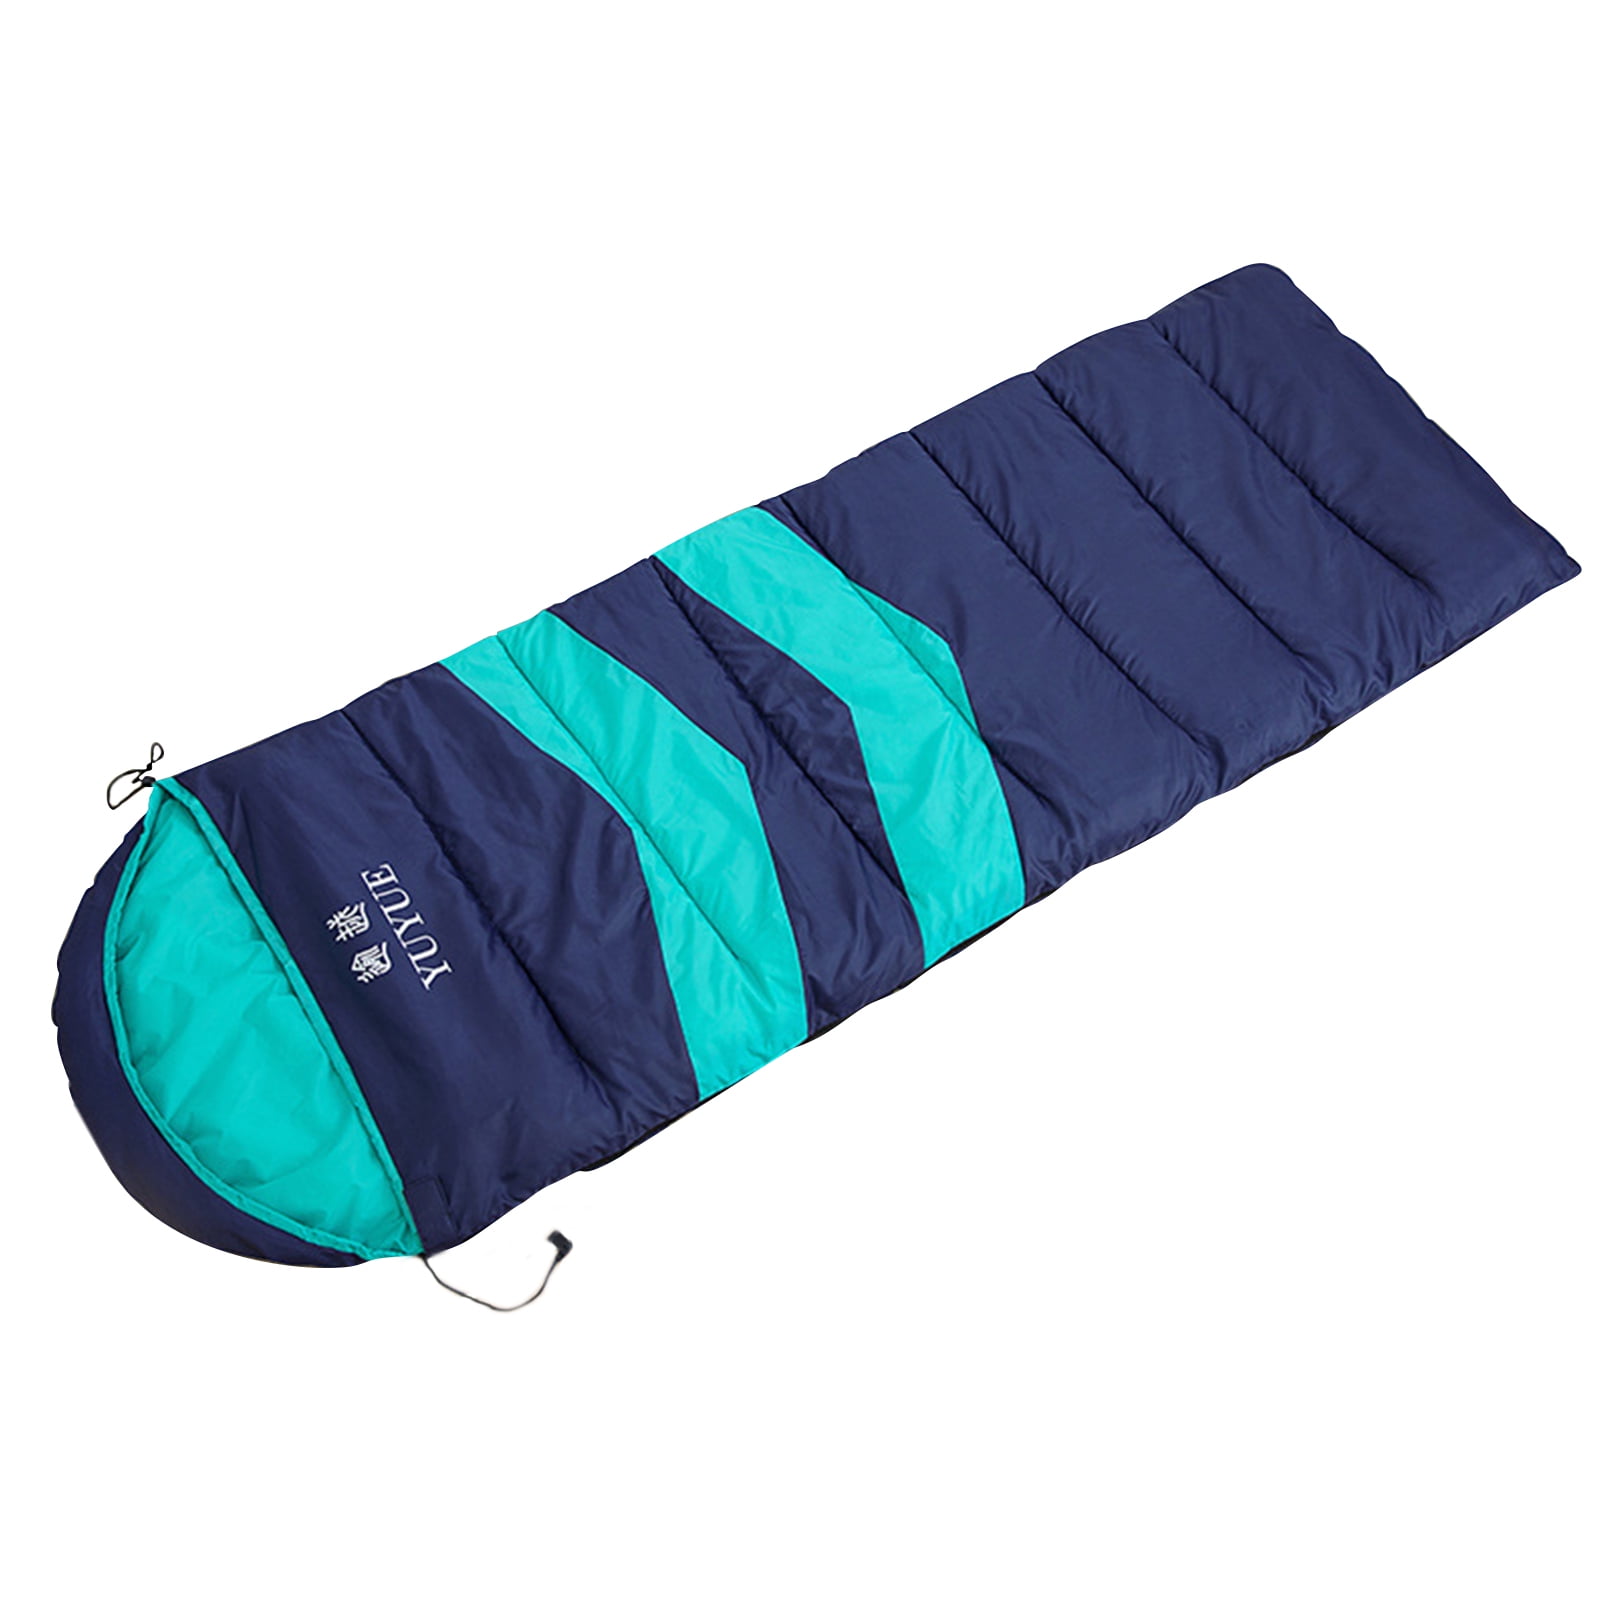 Details about   Outdoor camping sleeping bag down sleeping bag adult sleeping bag 